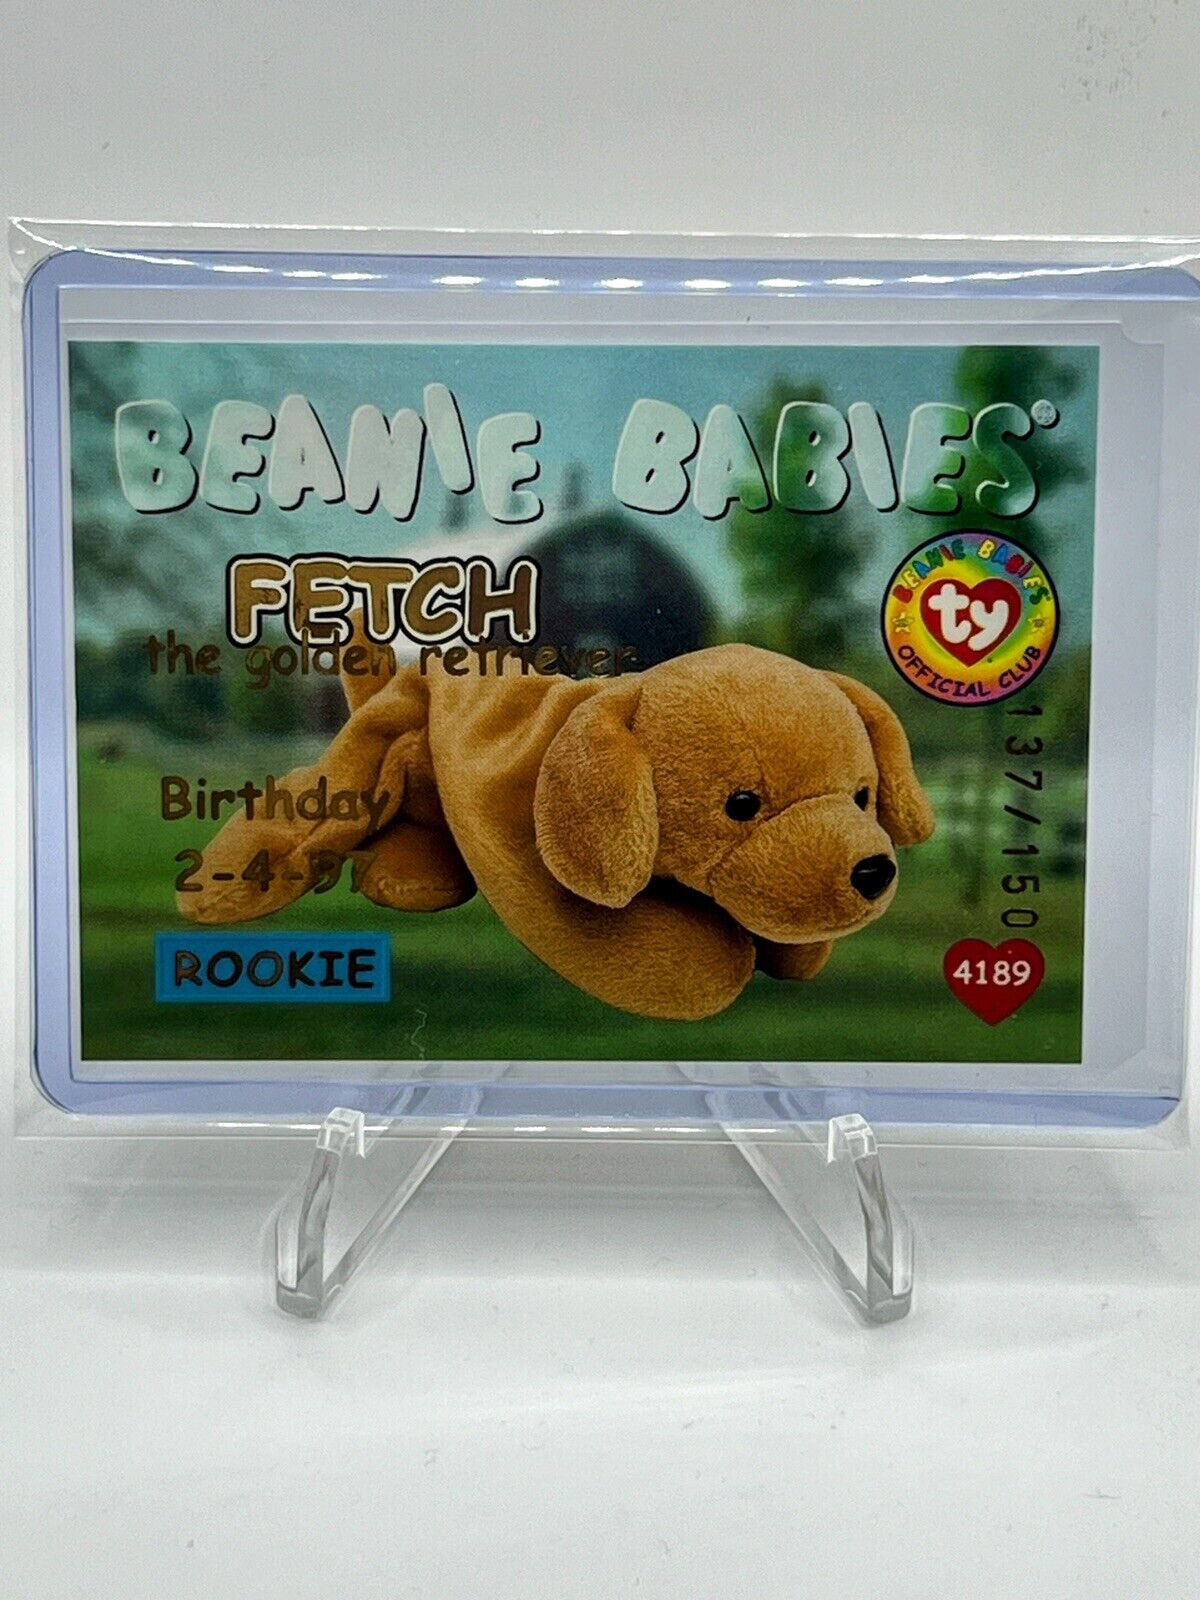 TY Beanie Babies Trading Card, Birthday S1, #33 Fetch GOLD # 137/150 Rookie